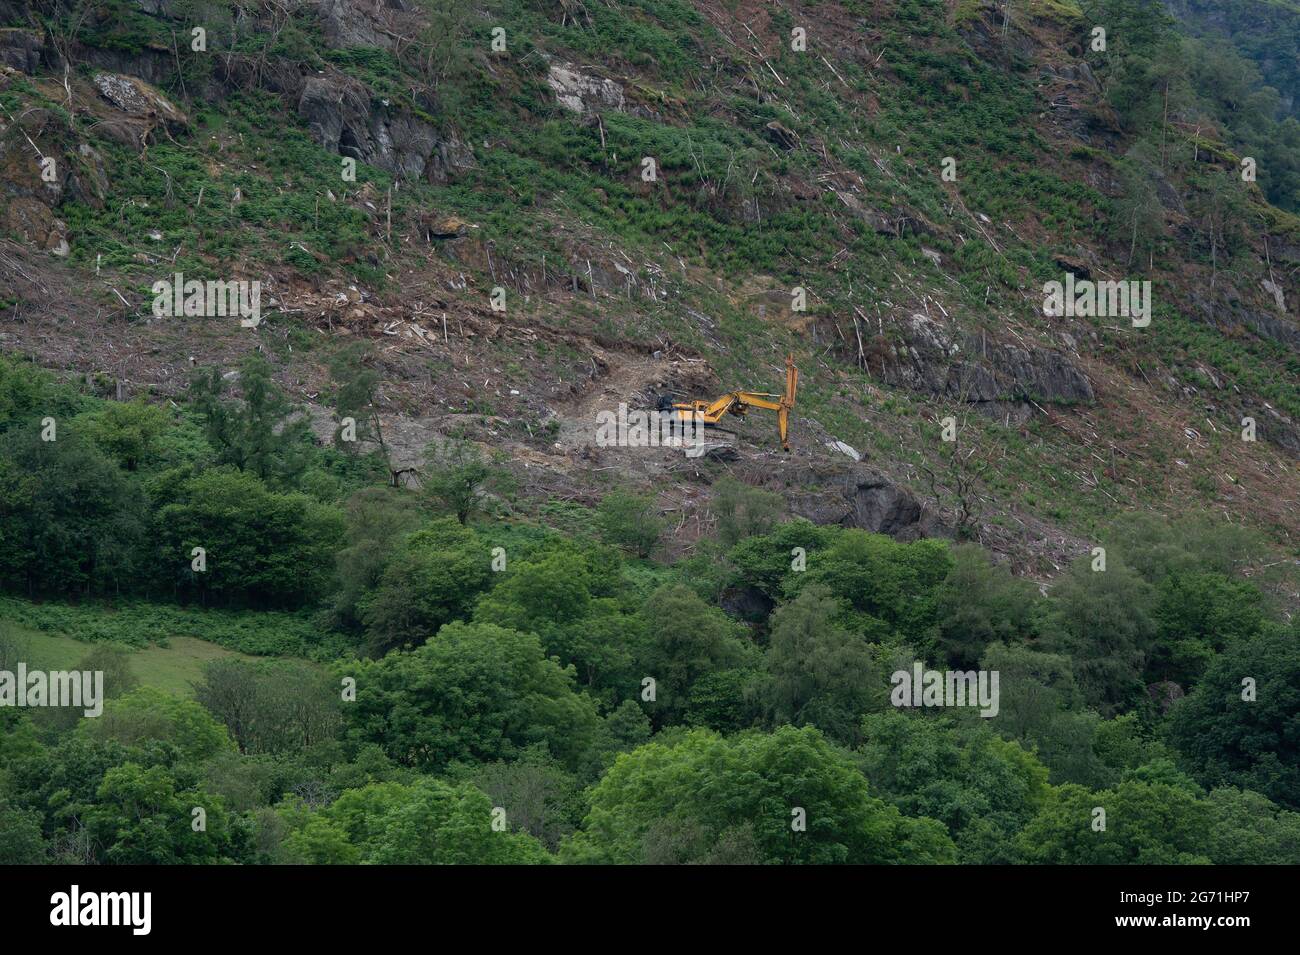 Yellow excavation vehicle working on the side of a mountain in the Brecon Beacons Stock Photo